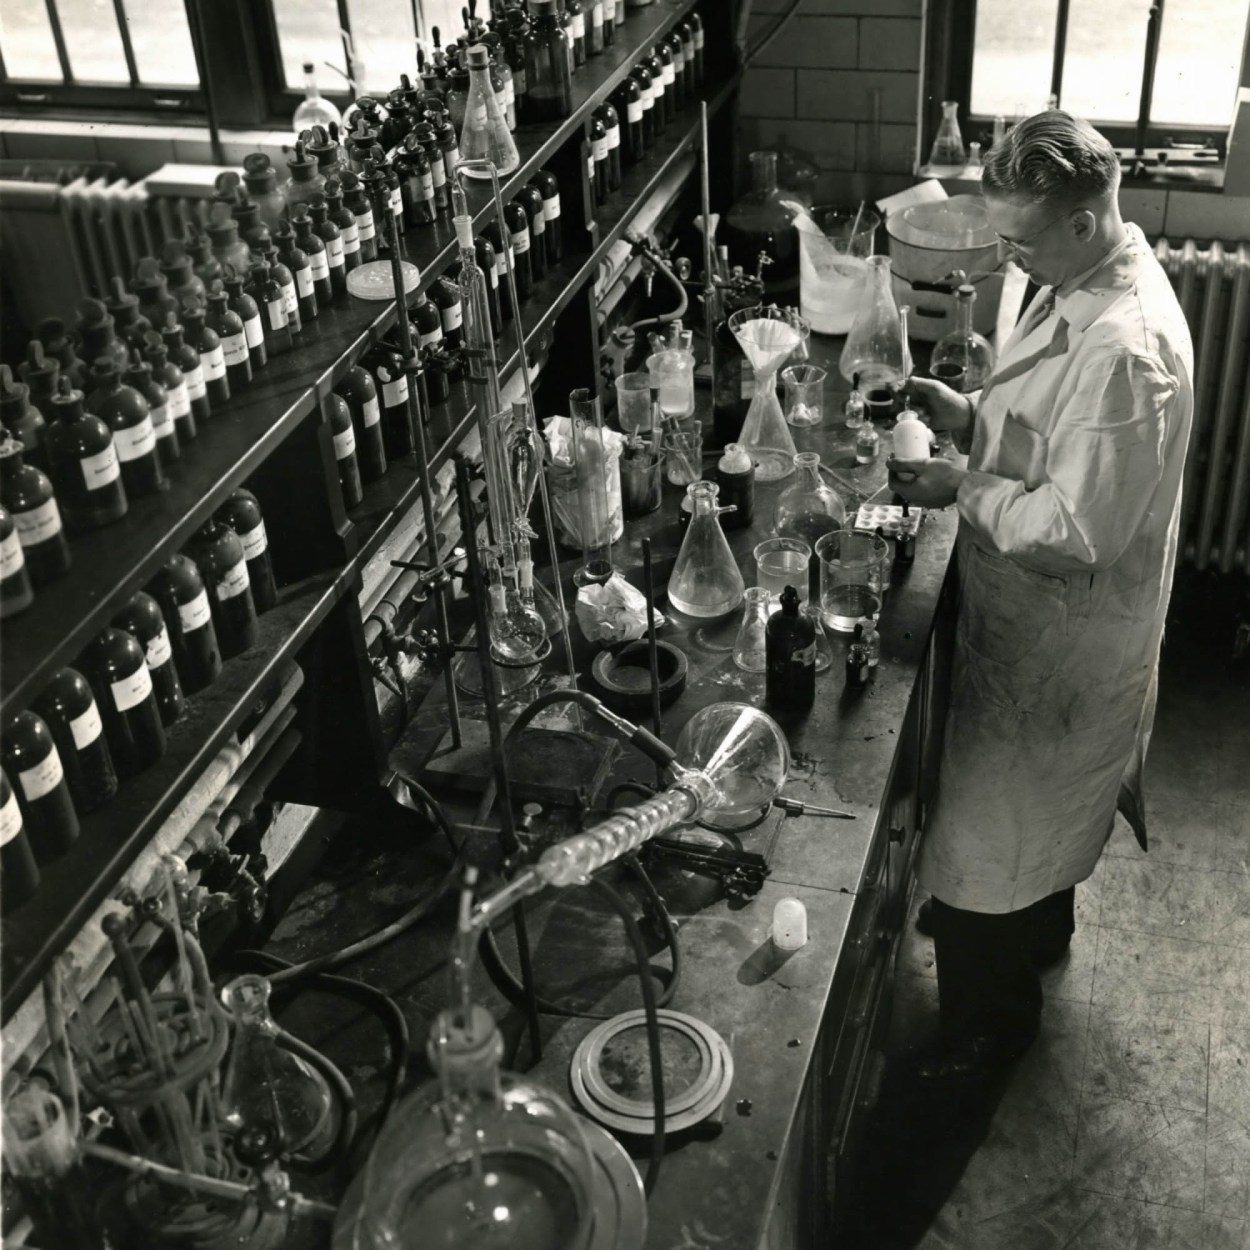 Photo: Production of pharmaceuticals at Merck/MSD in 1939